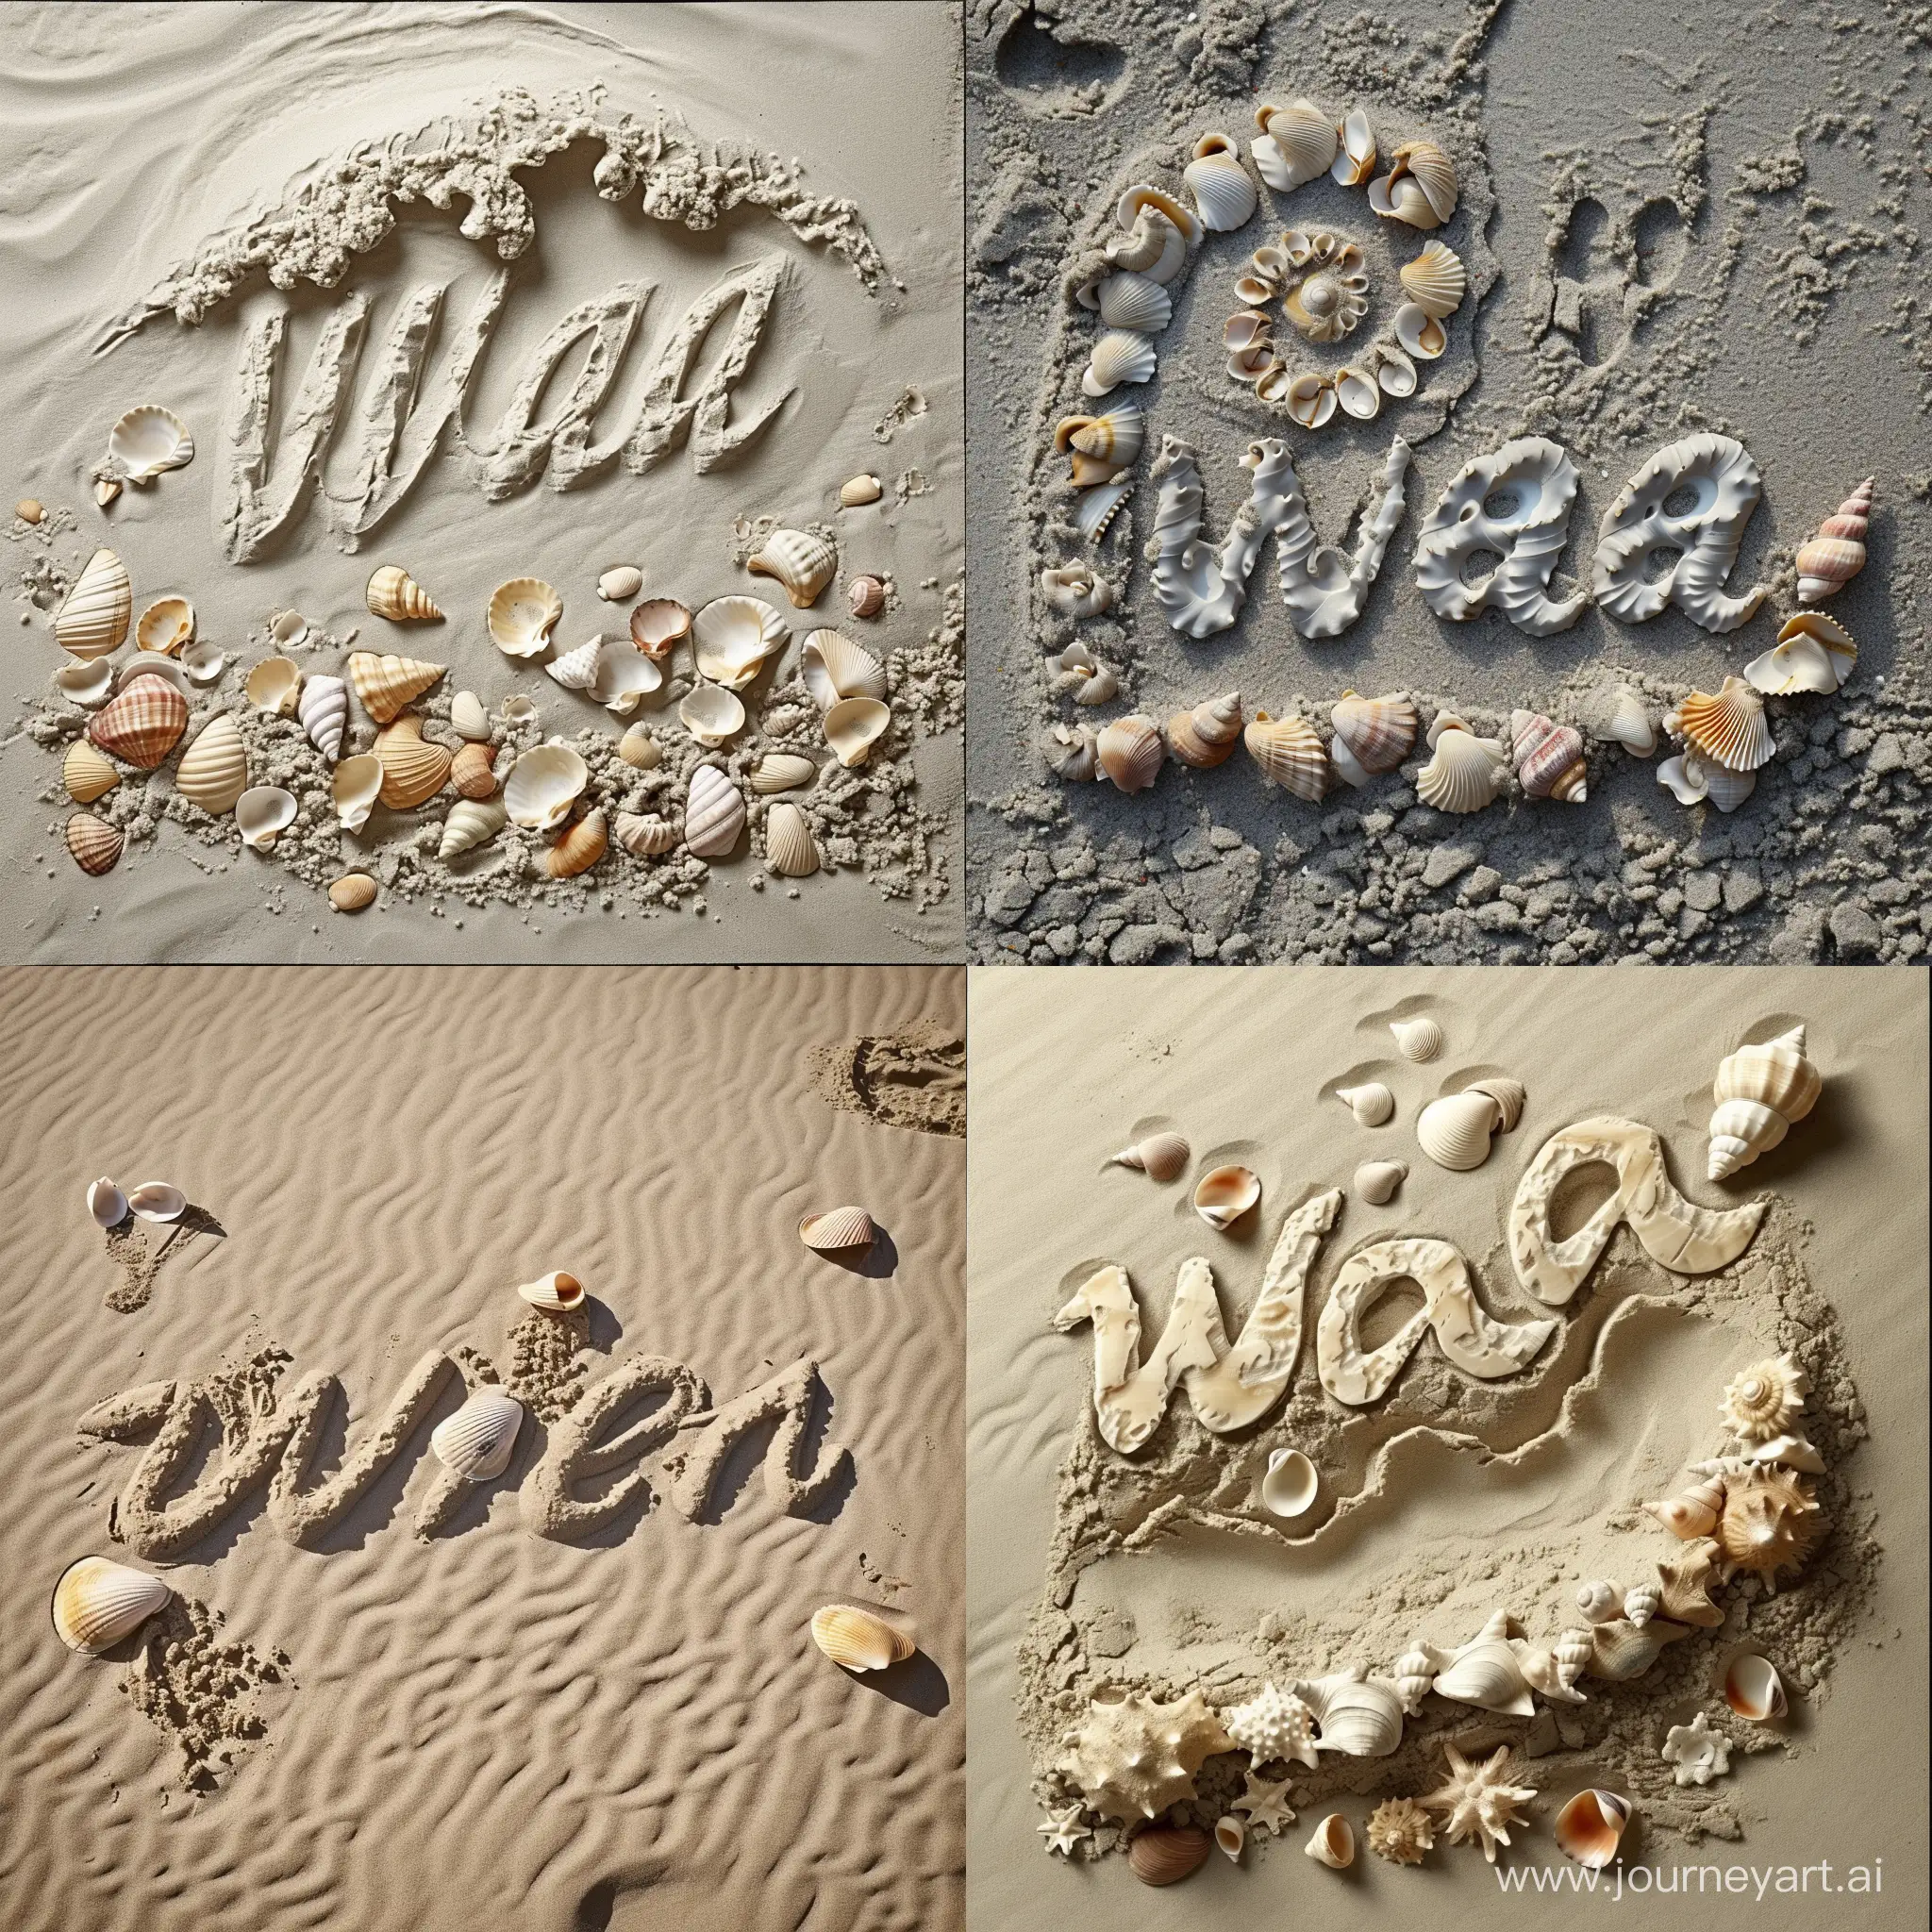 Wave - write this word on the sand using sea shells